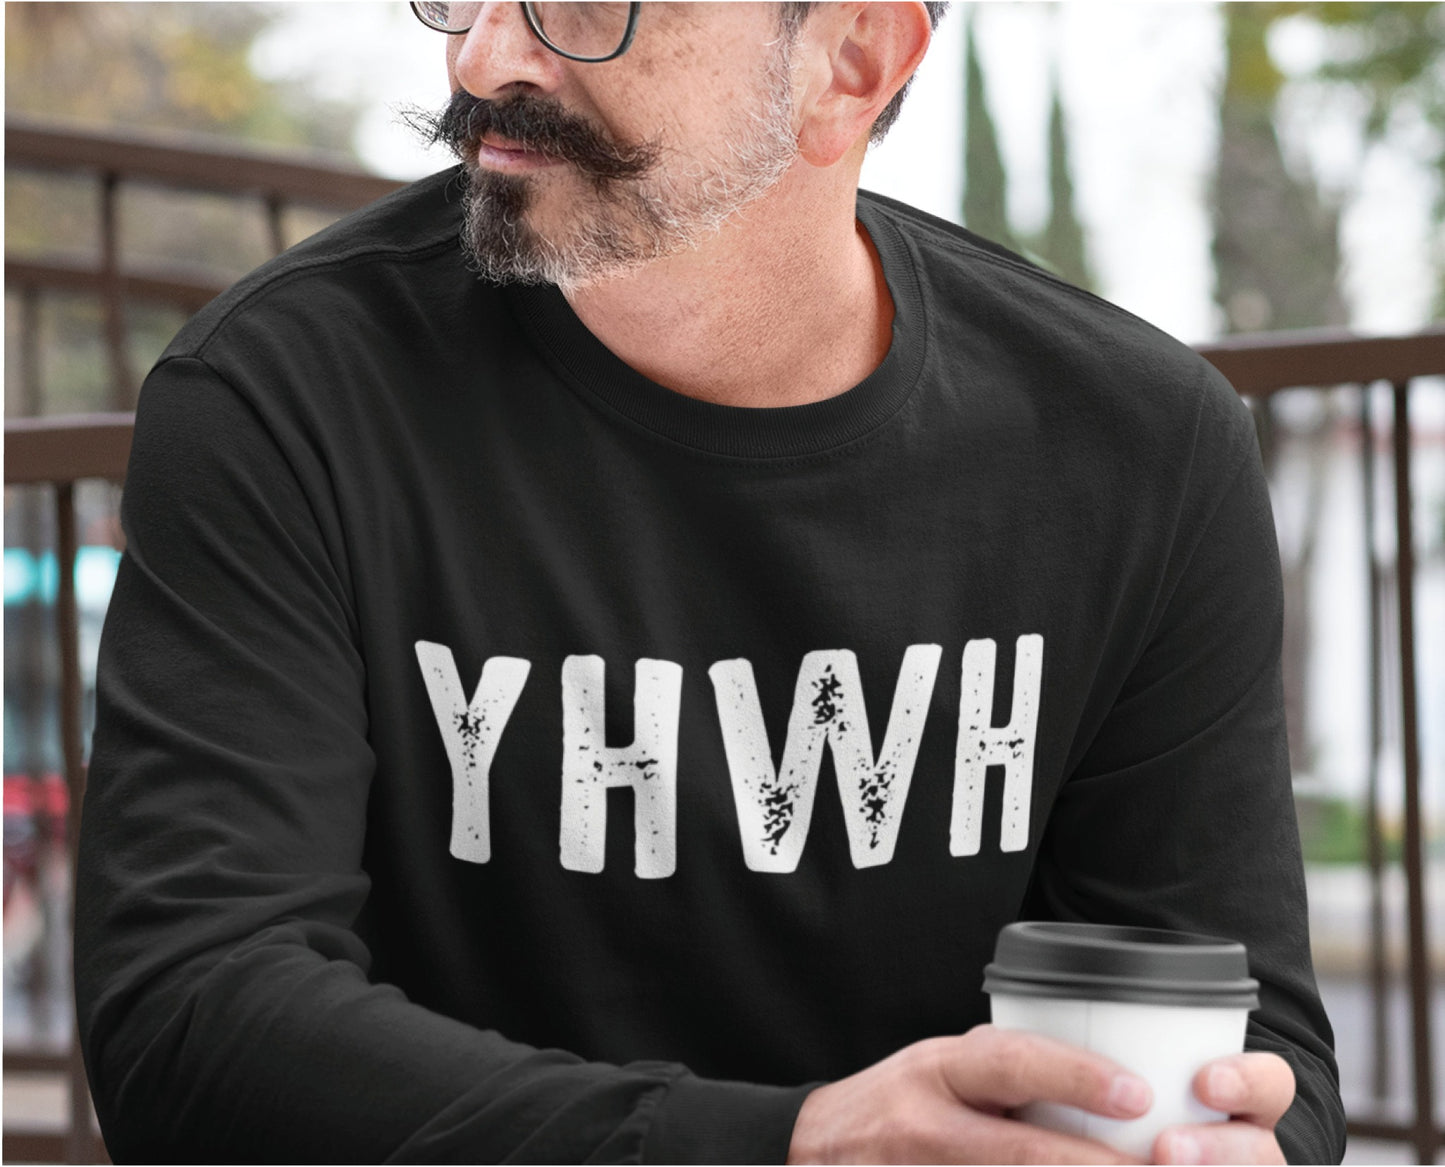 YHWH Hebrew Biblical Name of God Yahweh Christian aesthetic design printed in white distressed lettering on soft black long sleeve tee for men